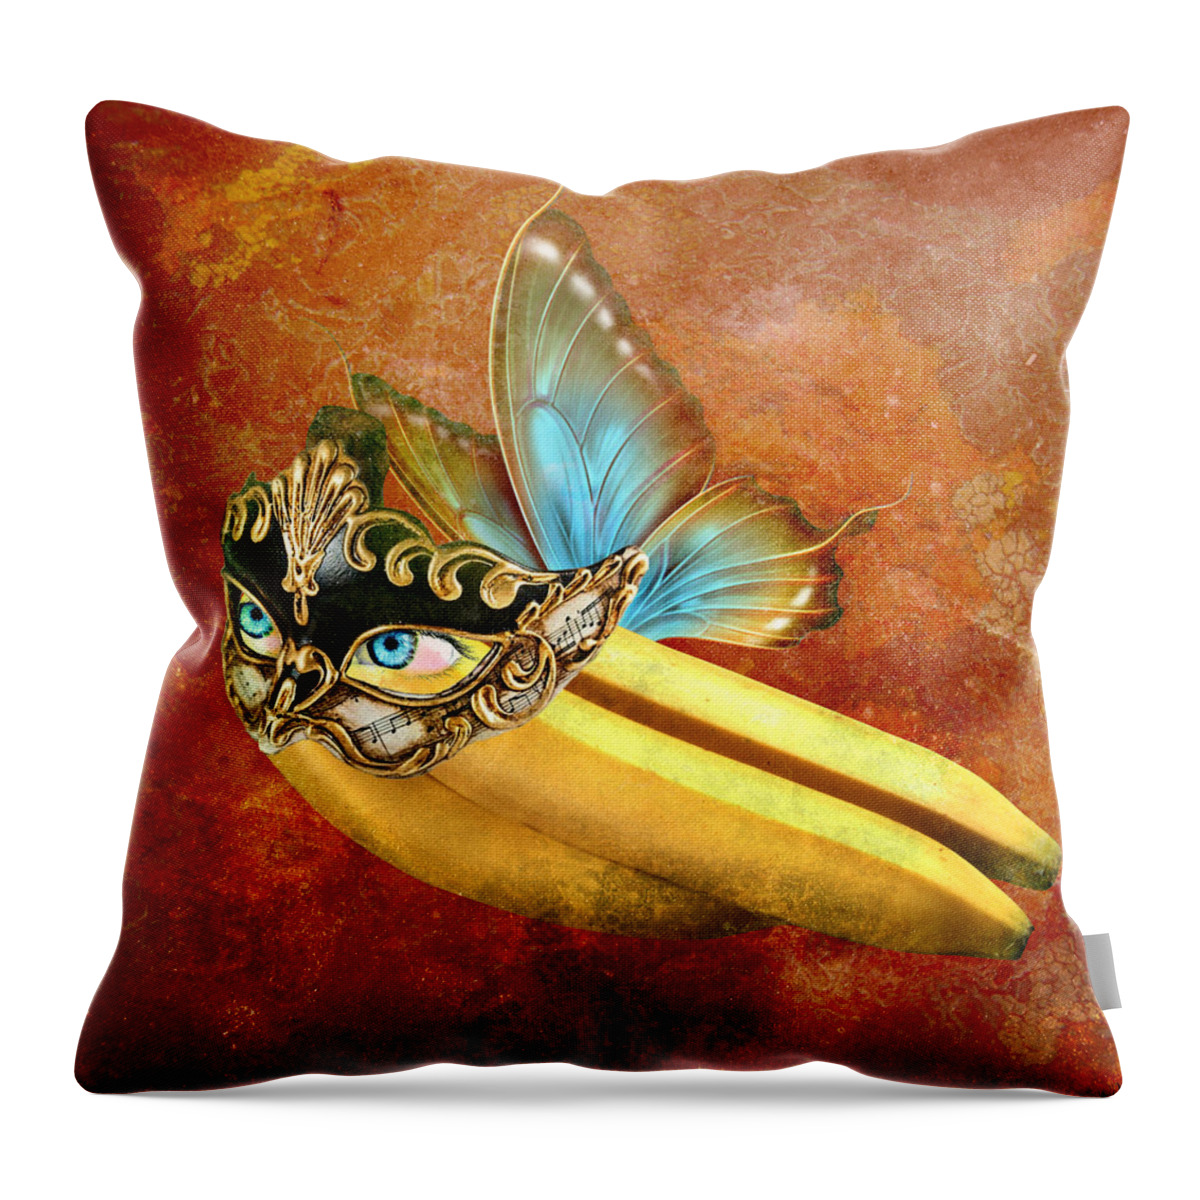 Surreal Throw Pillow featuring the painting Evolve 2 by Ally White